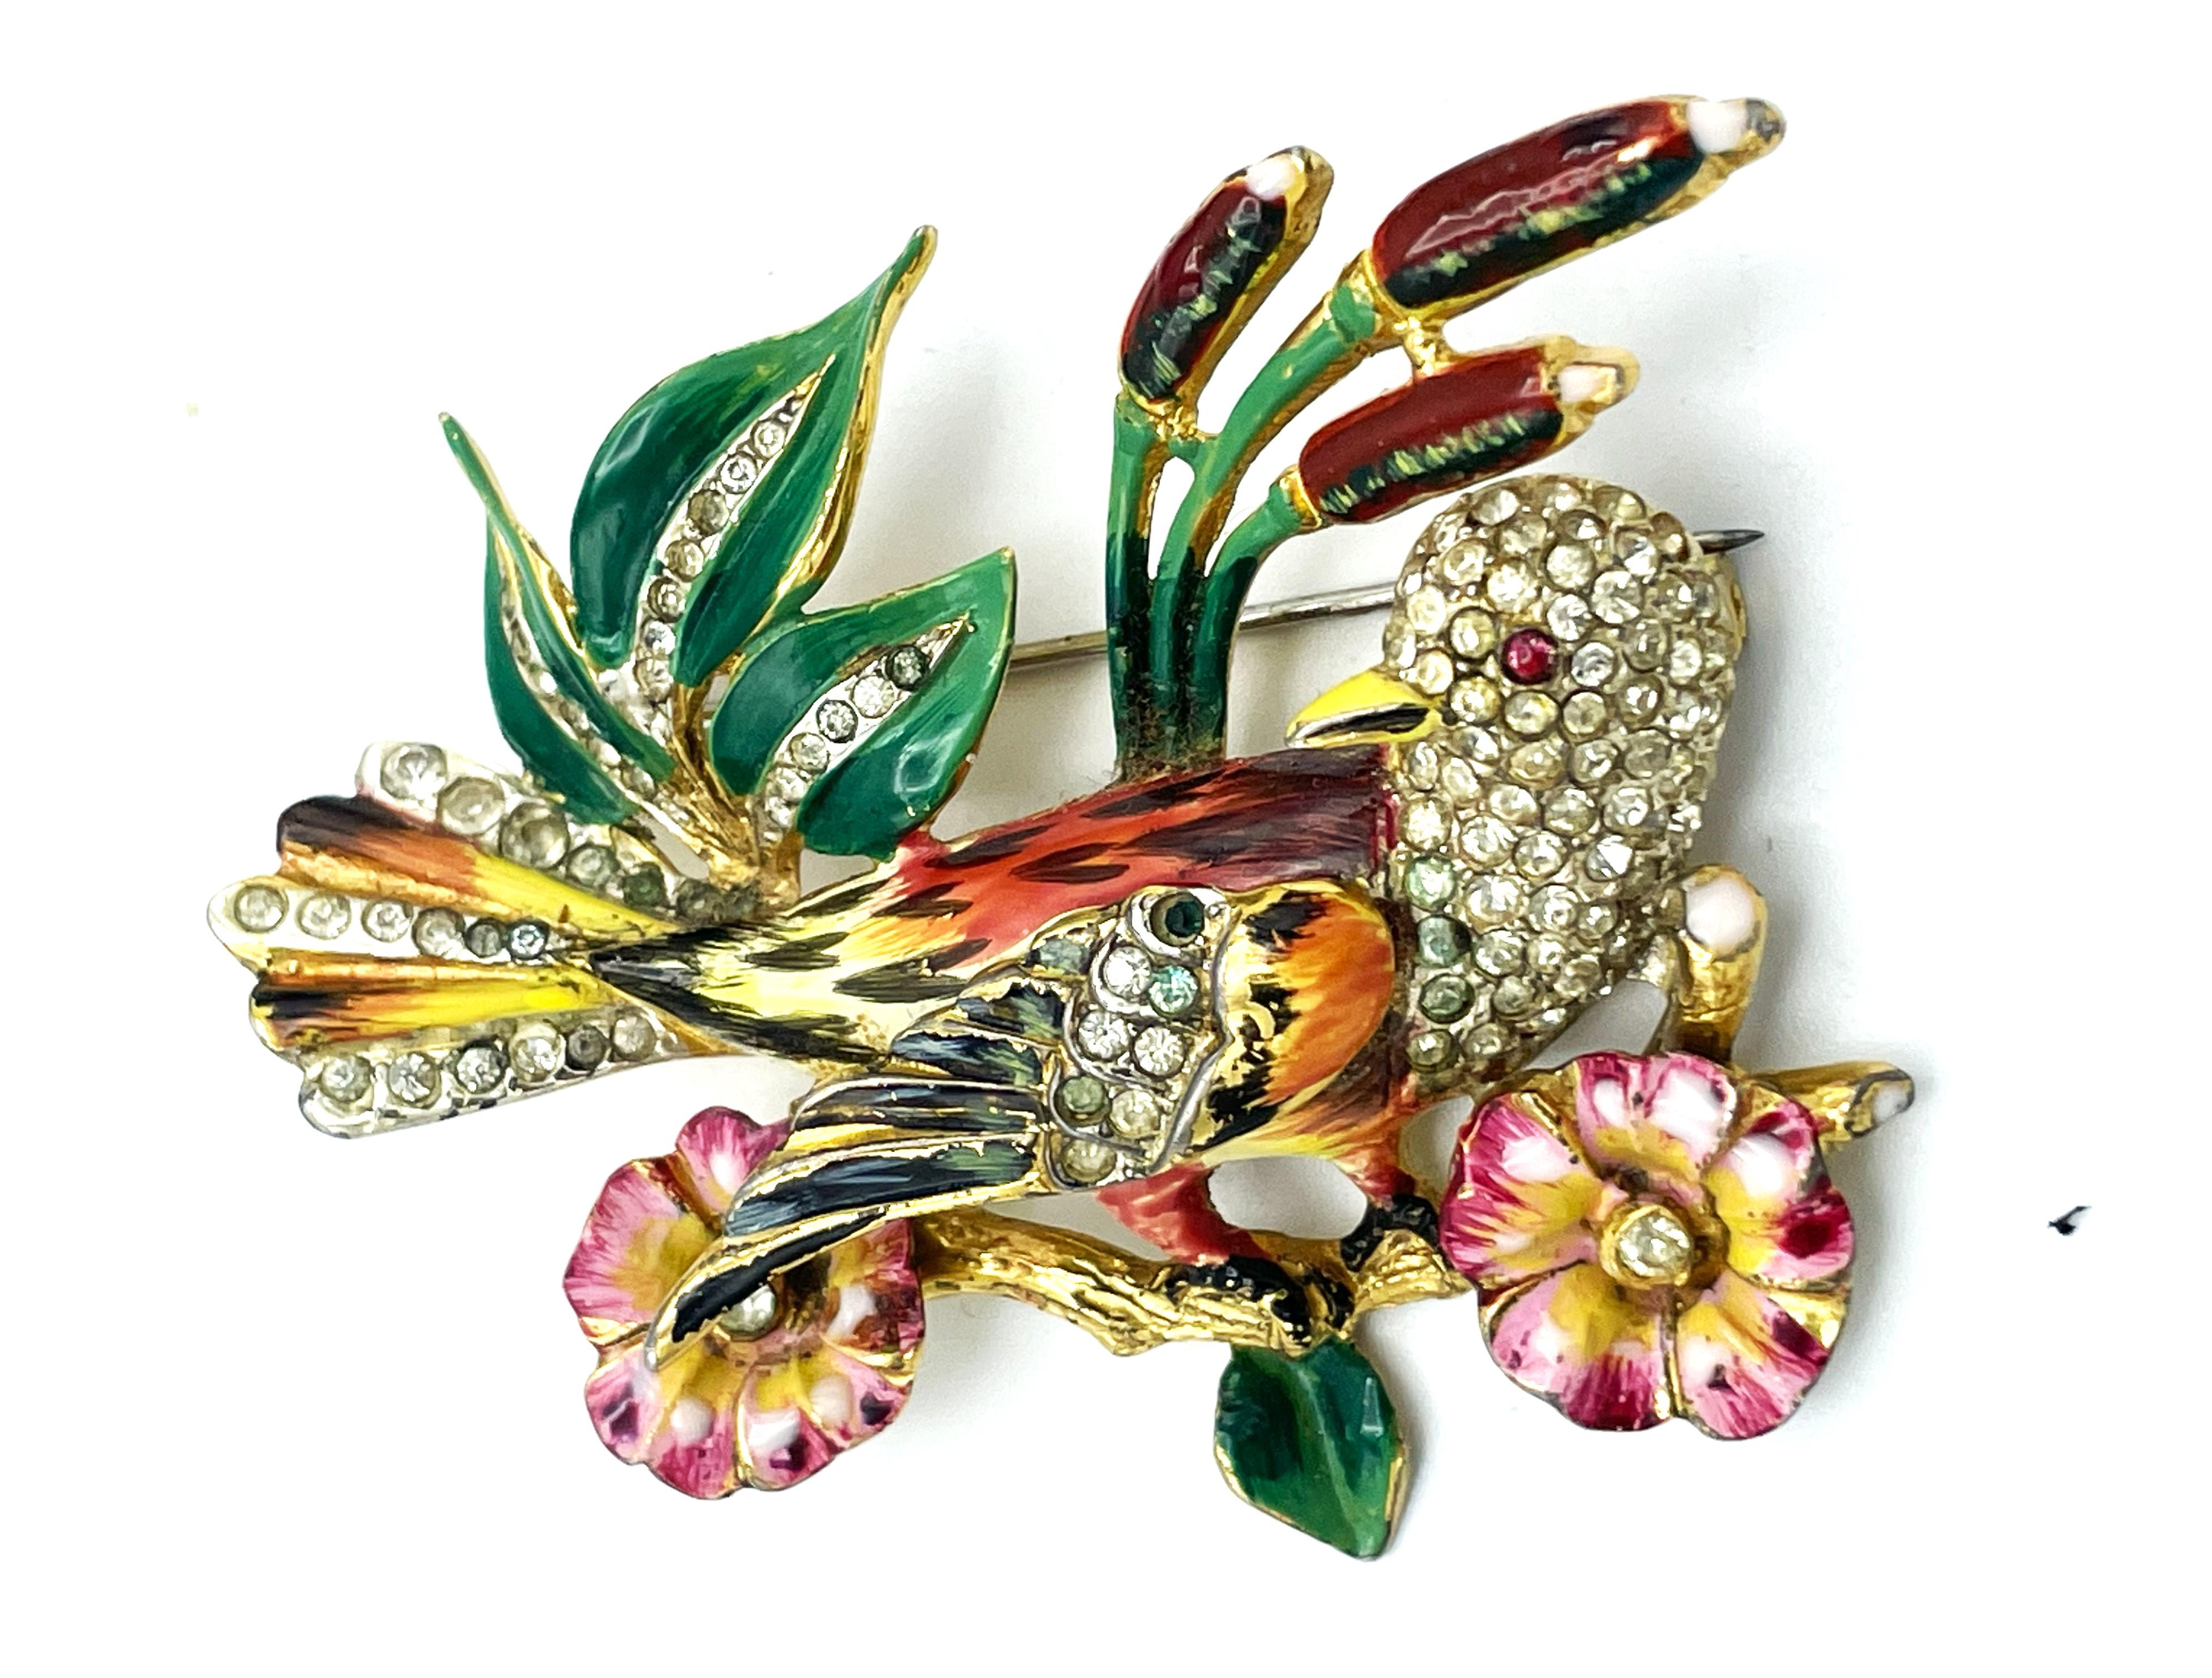 2 Coro Craft brooches, Birds on branch, gold plated Sterling ,  enamailing, rhinestones, 1942 USA

1 large bird on branch with Bullrusher and flowers and one smaller bird on branch, also gold plated sterling, enamailing and rhinestons, also Coro